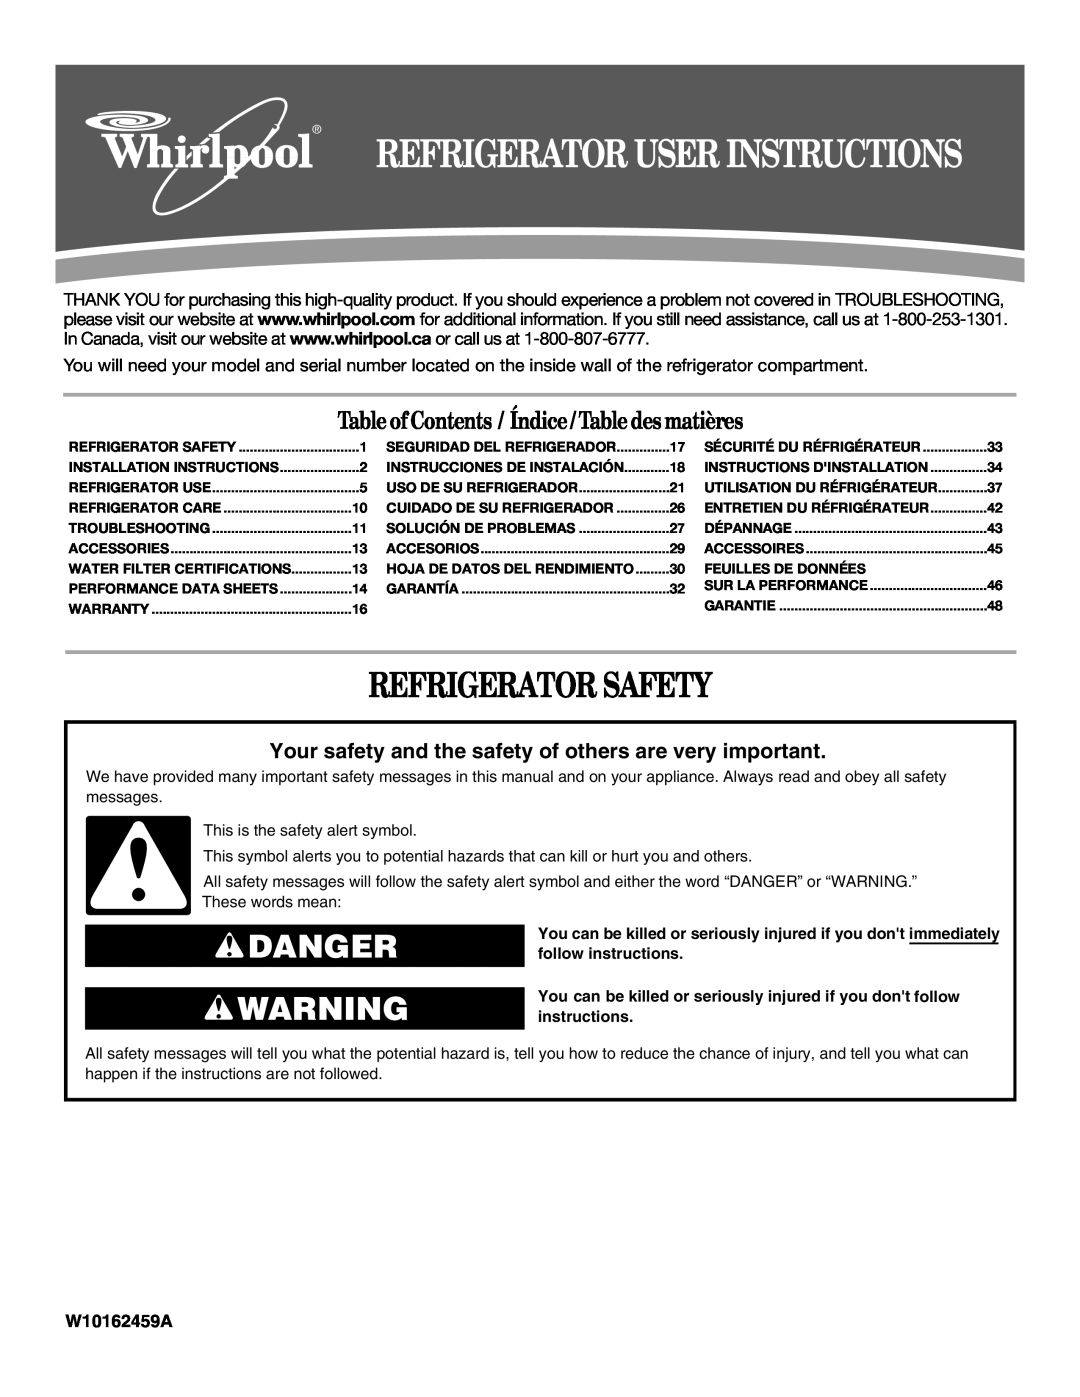 Whirlpool GS6NHAXV installation instructions Refrigerator Safety, Danger, Table ofContents / Índice / Table des matières 